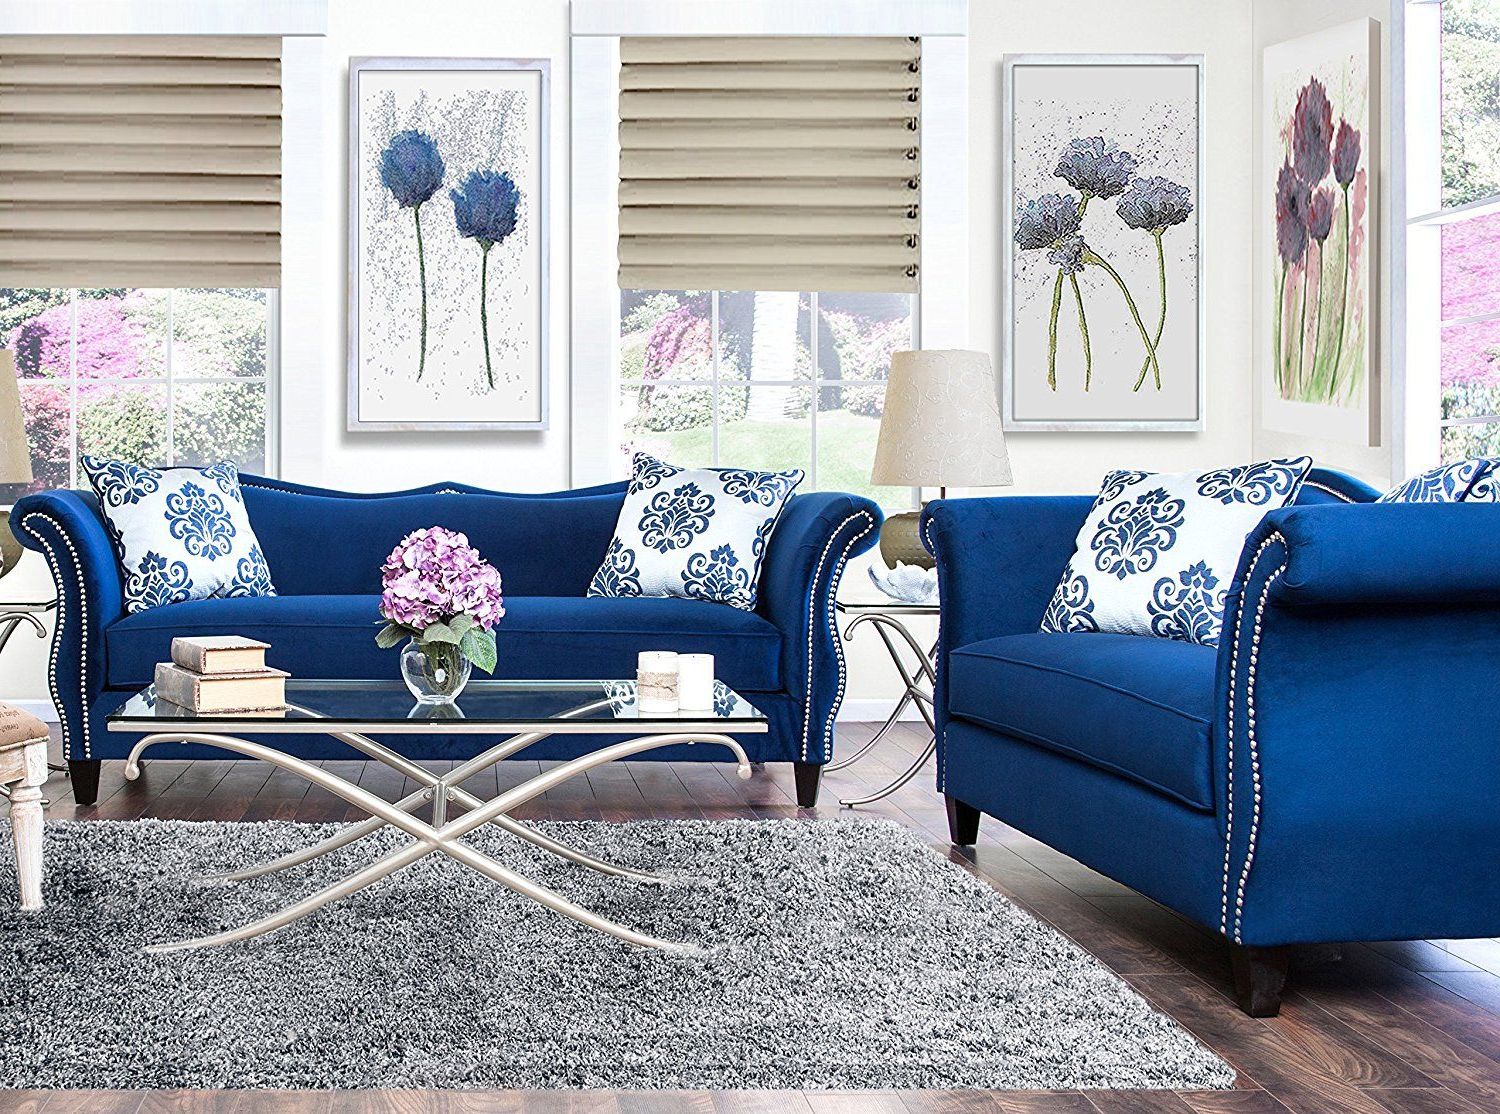 Blue Sofa Set, Blue Living Room, Blue Pertaining To Sofas In Blue (View 13 of 15)